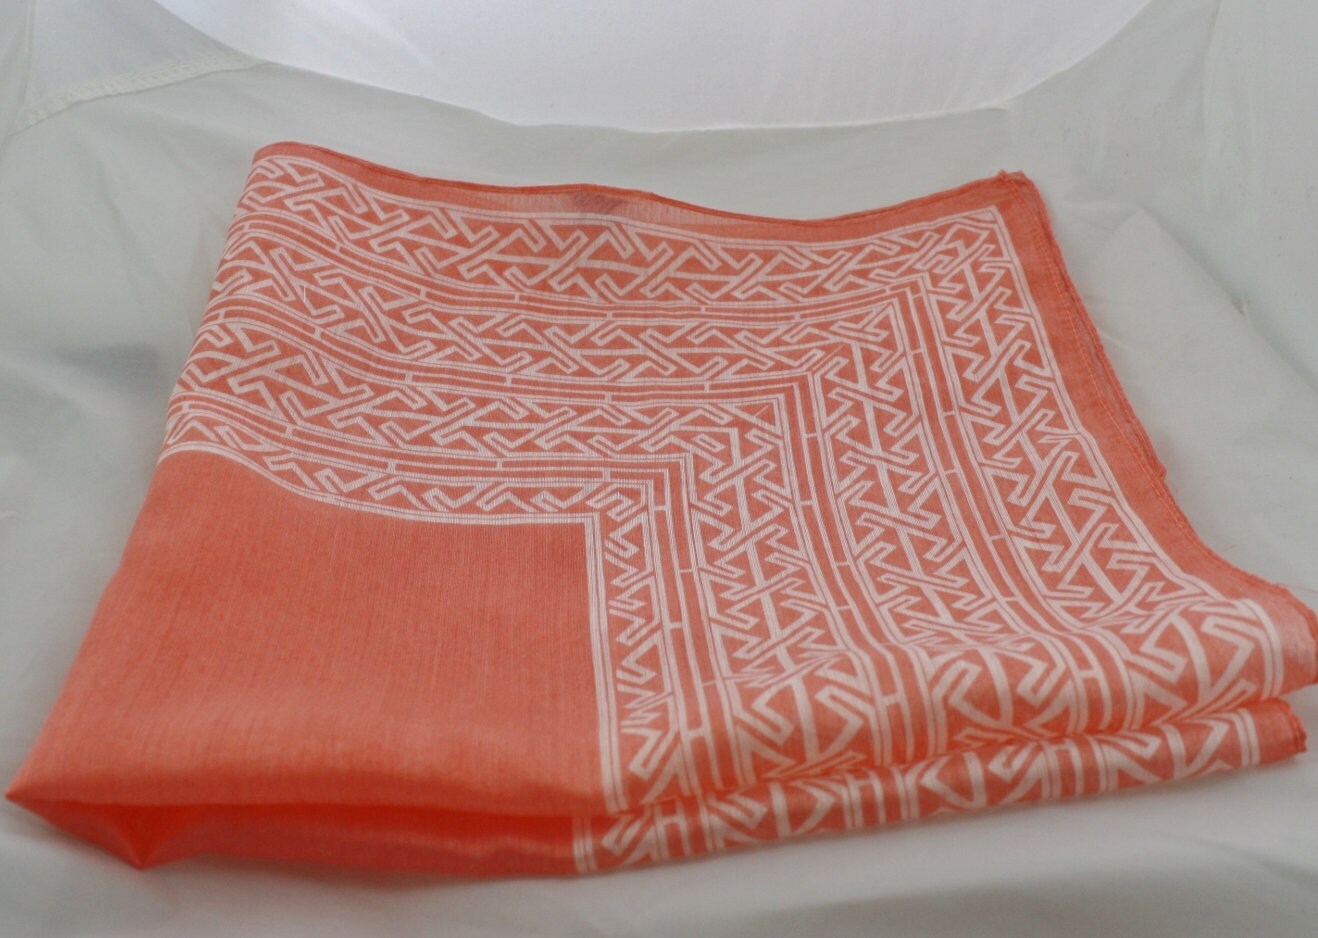 Peach White Border Rayon Nylon Blend Scarf, Vintage 21 Inch Square Made in Japan